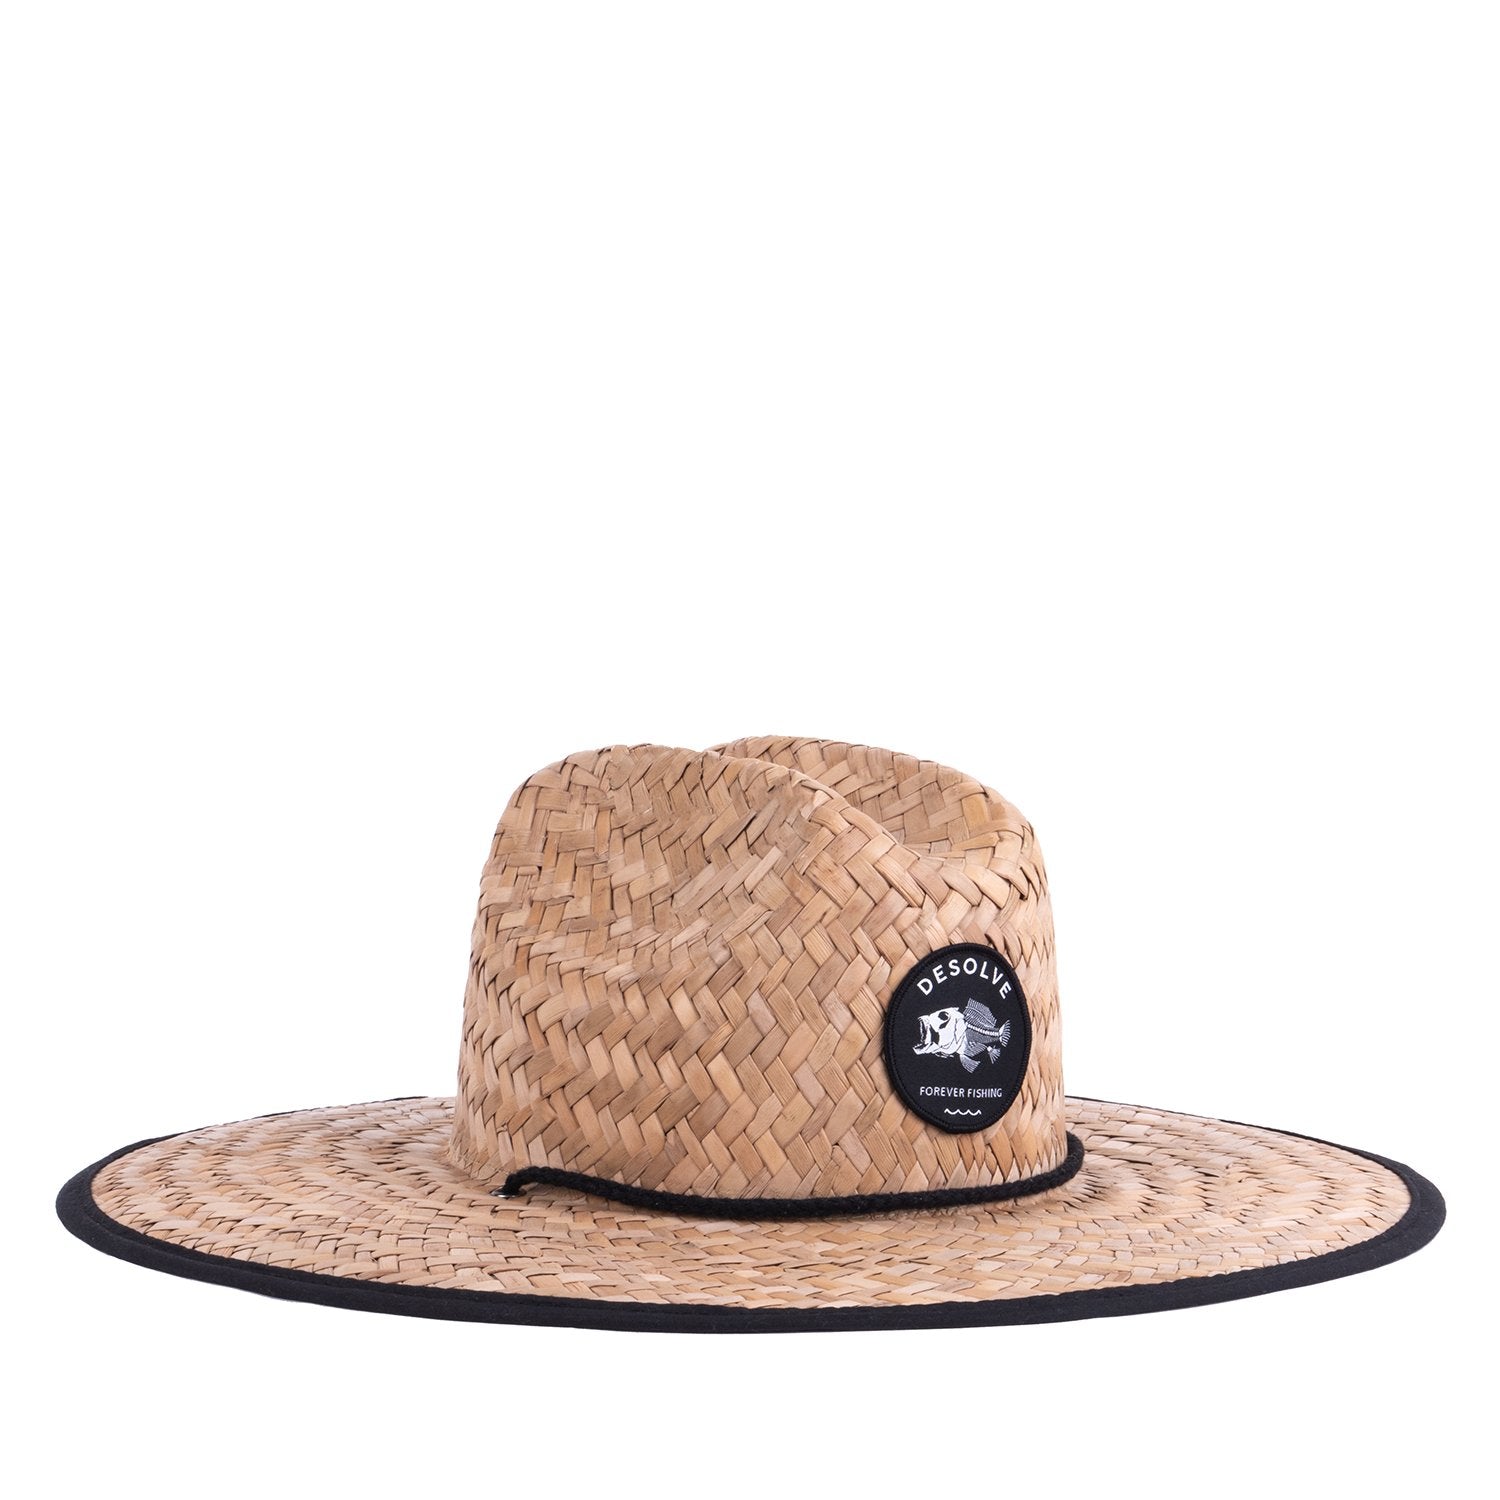 Snappy Straw Hat, 100% Rush Straw, One Size Fits Most, Brim Lining, Drawstring Fishing Hat, Mens - Desolve Supply Co.